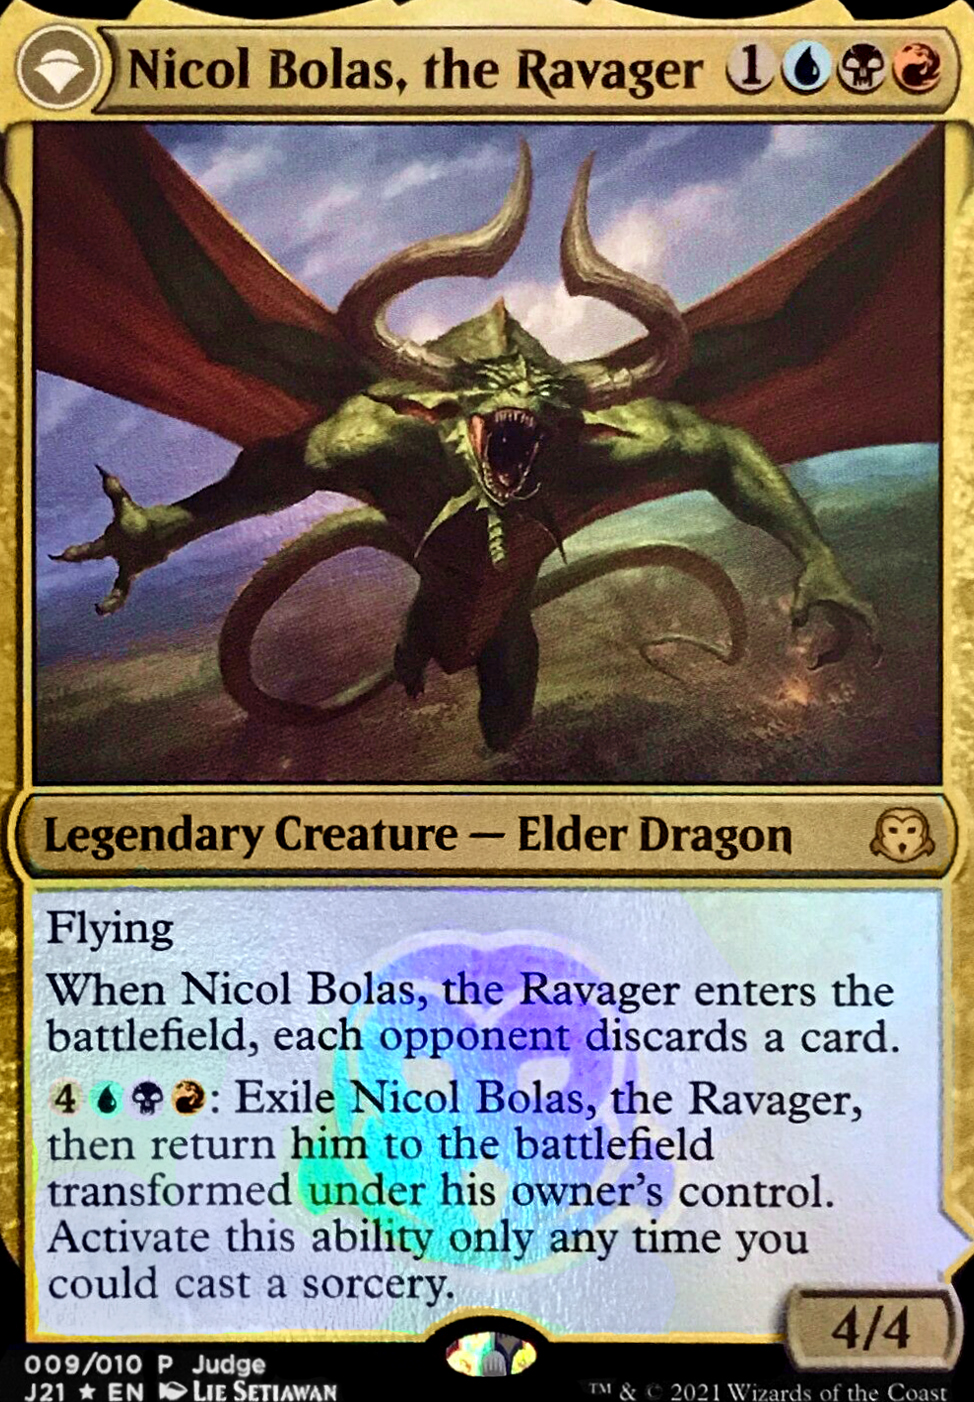 Nicol Bolas, the Ravager feature for Ravaging Spellcraft